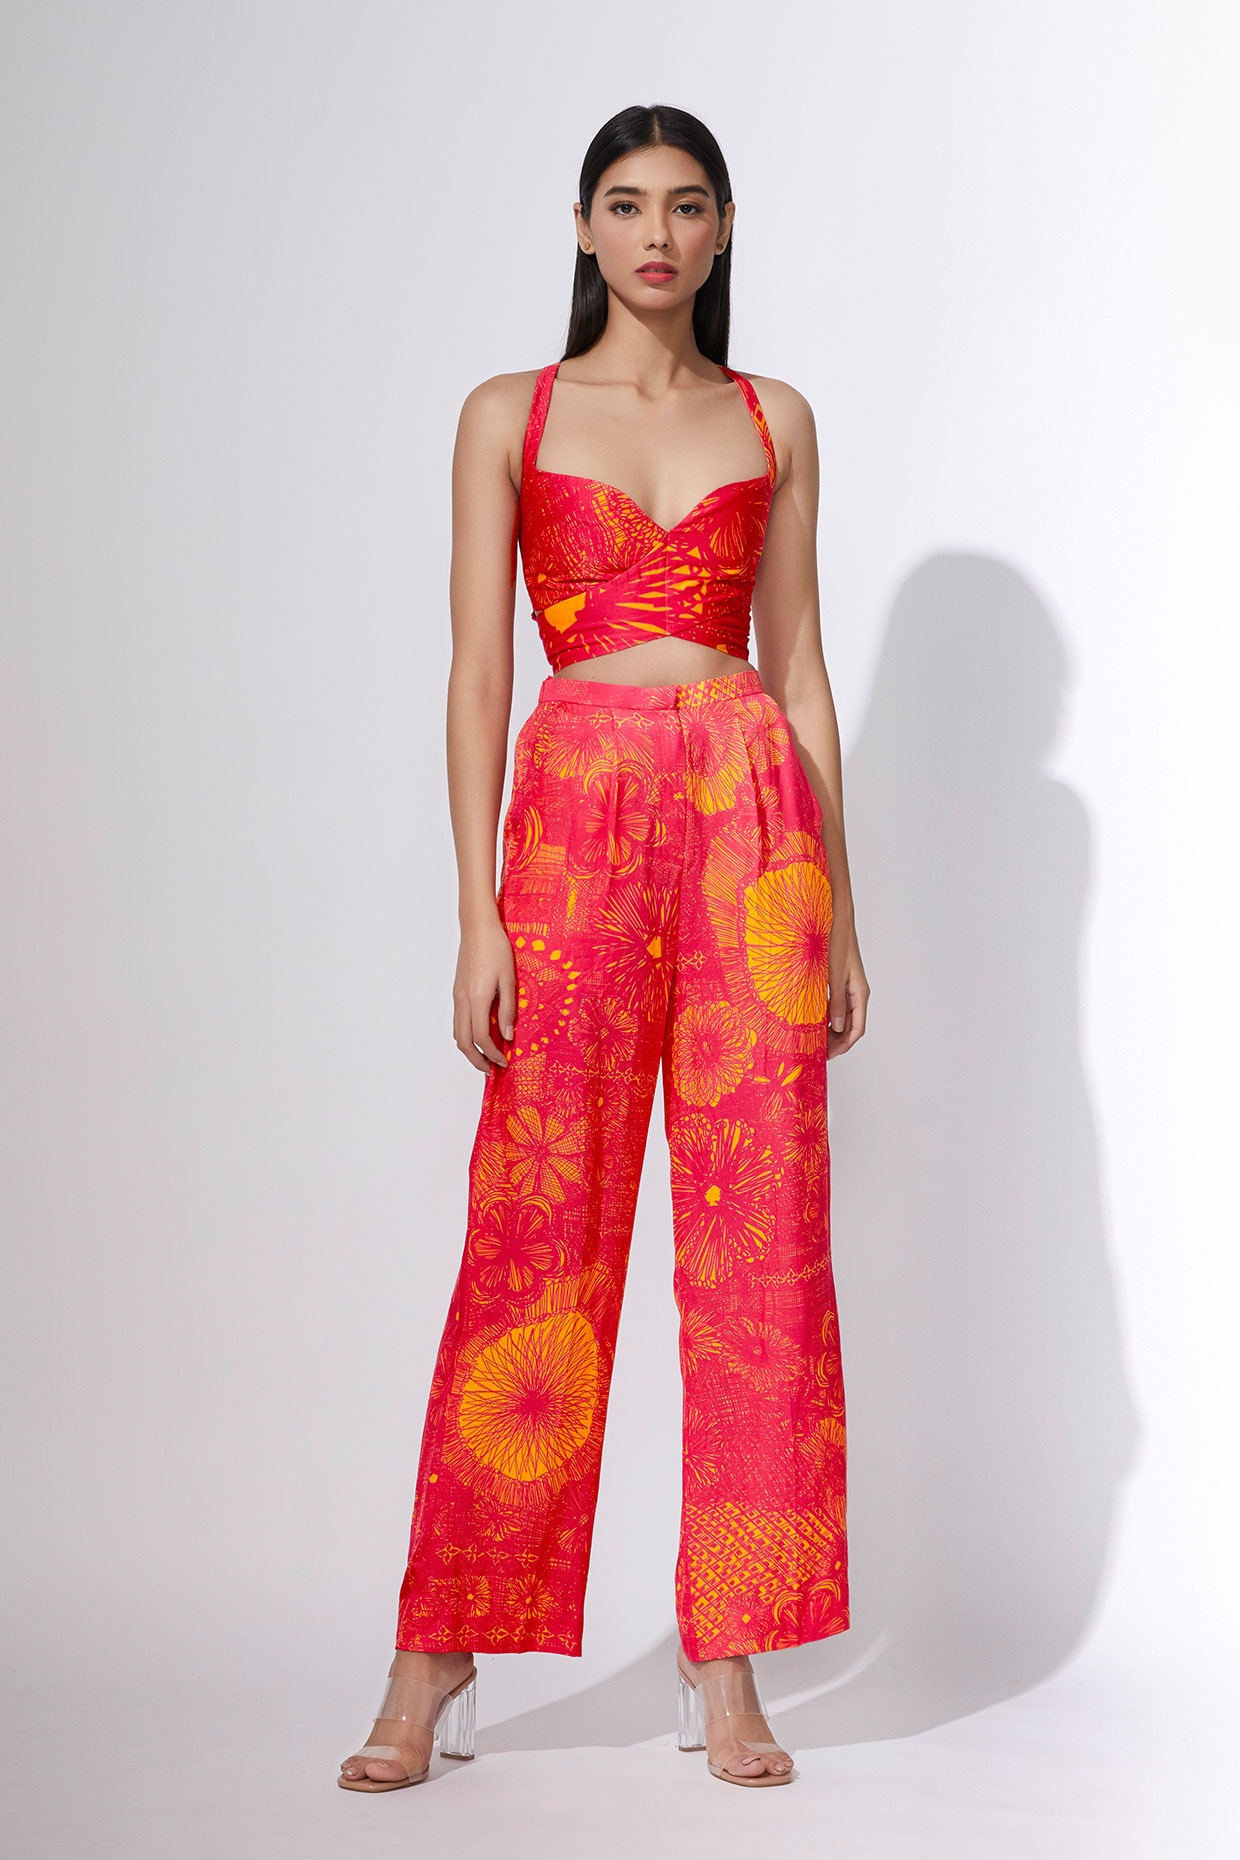 Cross back bustier with trousers